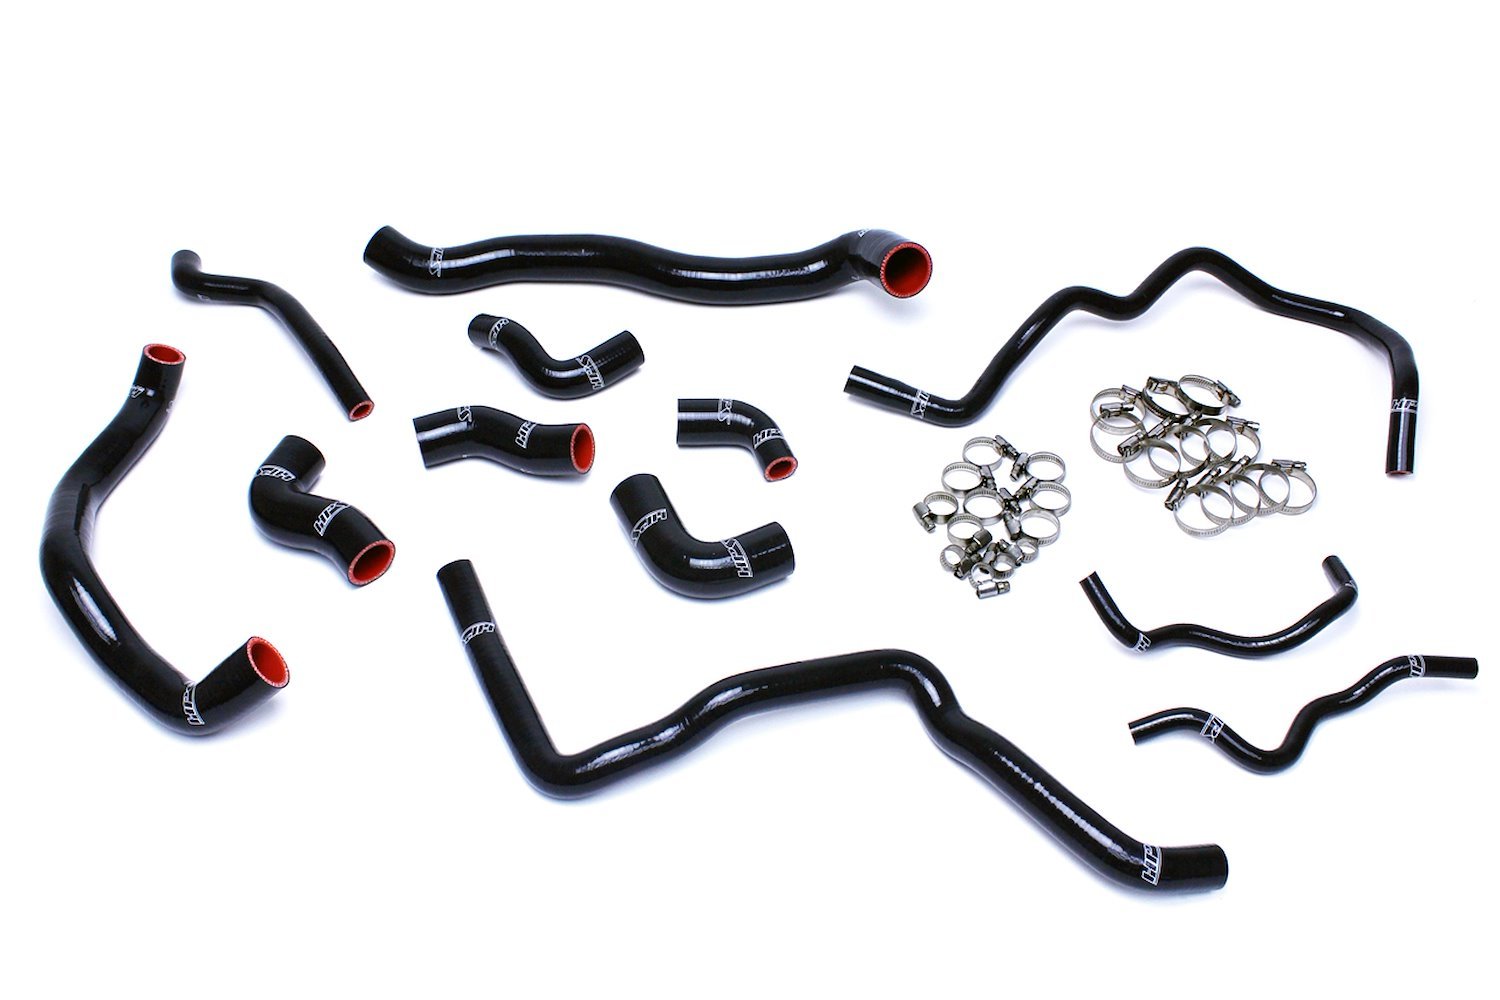 57-1476-BLK Coolant Hose Kit, 3-Ply Reinforced Silicone, Replaces Rubber Radiator & Ancillary Coolant Hoses